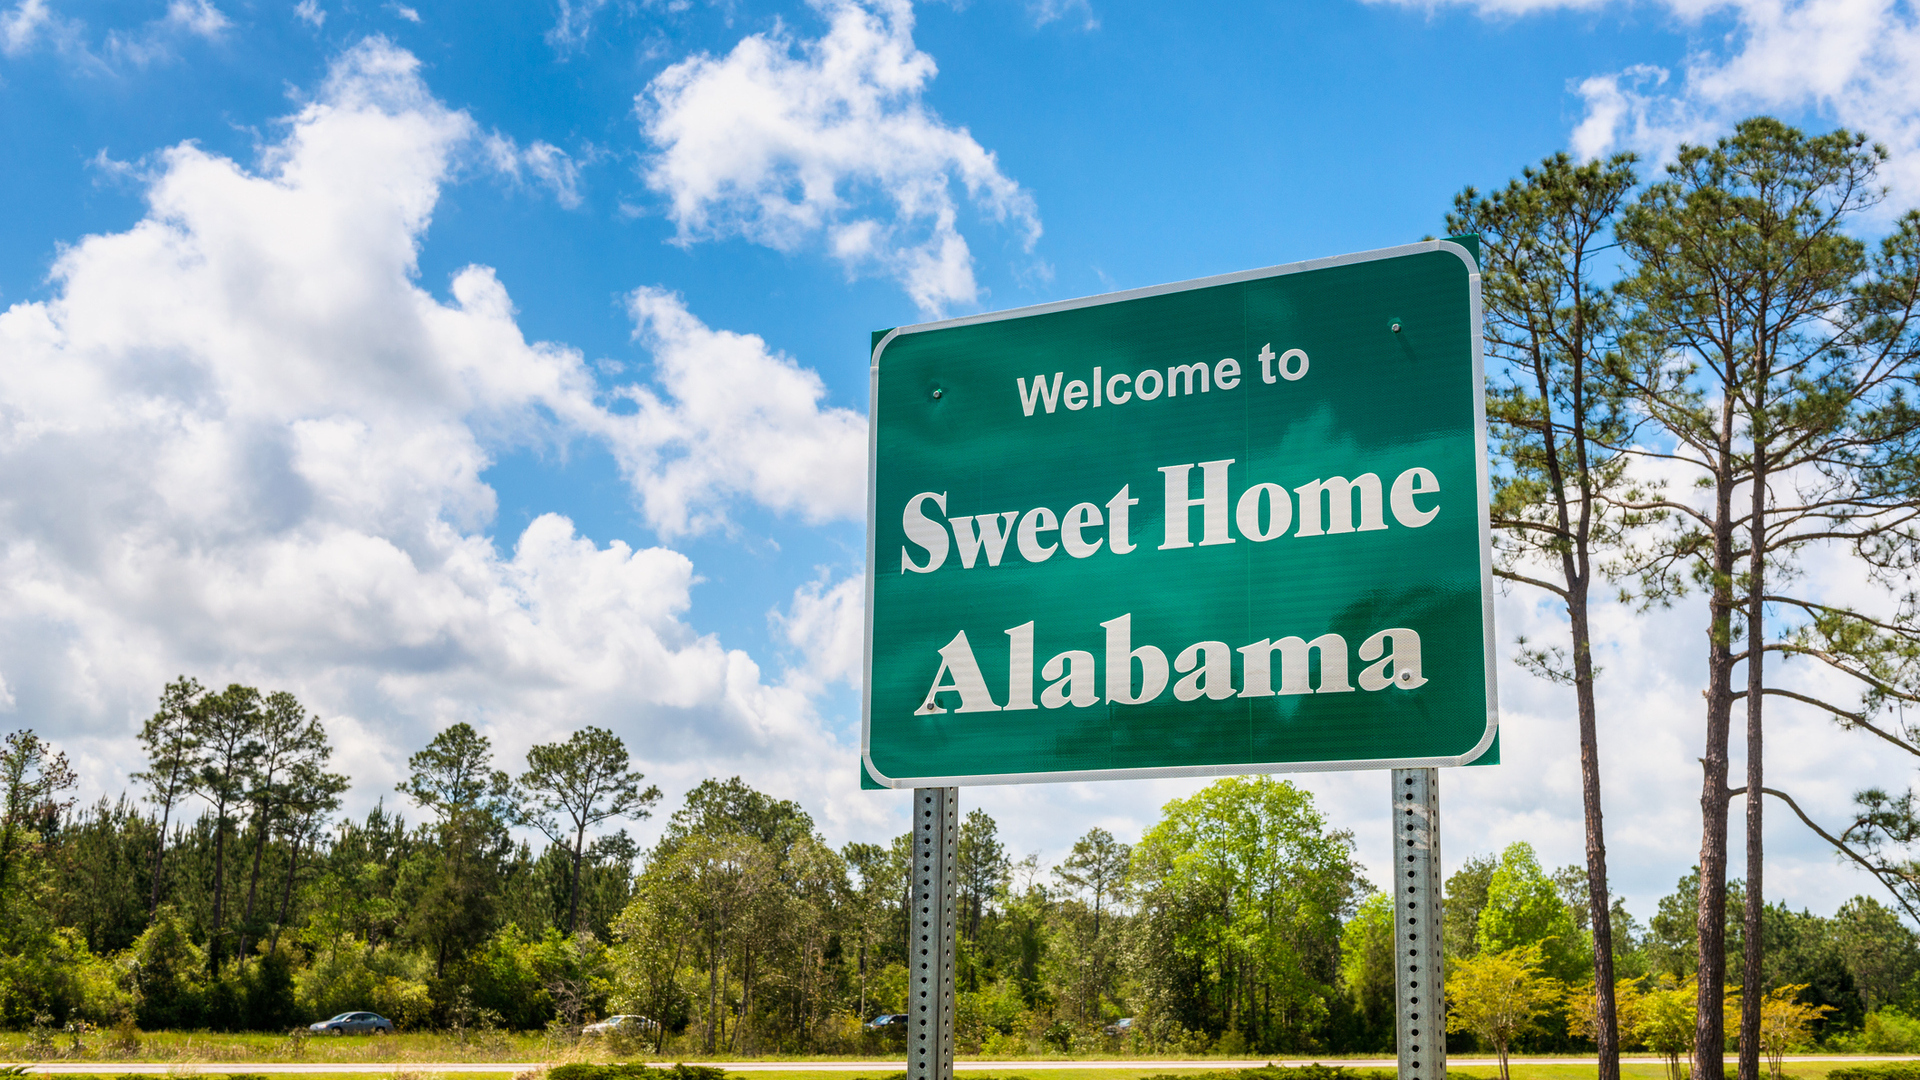 <ul> <li><strong>State Sales Tax</strong>: 9.25%</li> <li><strong>Cost of Living</strong>: 88.8</li> <li><strong>Average Social Security Benefits</strong>: $1,648.37</li> </ul> <p>Alabama has a high state sales tax, but a low median property tax rate of 0.39%, which translates to an extremely low $824 per year.</p> <p><strong>Boomers Prefer To Retire Abroad: <a href="https://www.gobankingrates.com/retirement/planning/boomers-prefer-retire-abroad-top-5-places-retire-outside-us/?utm_term=related_link_6&utm_campaign=1234076&utm_source=msn.com&utm_content=8&utm_medium=rss" rel="">Top 5 Places To Retire Outside of the US</a></strong></p>